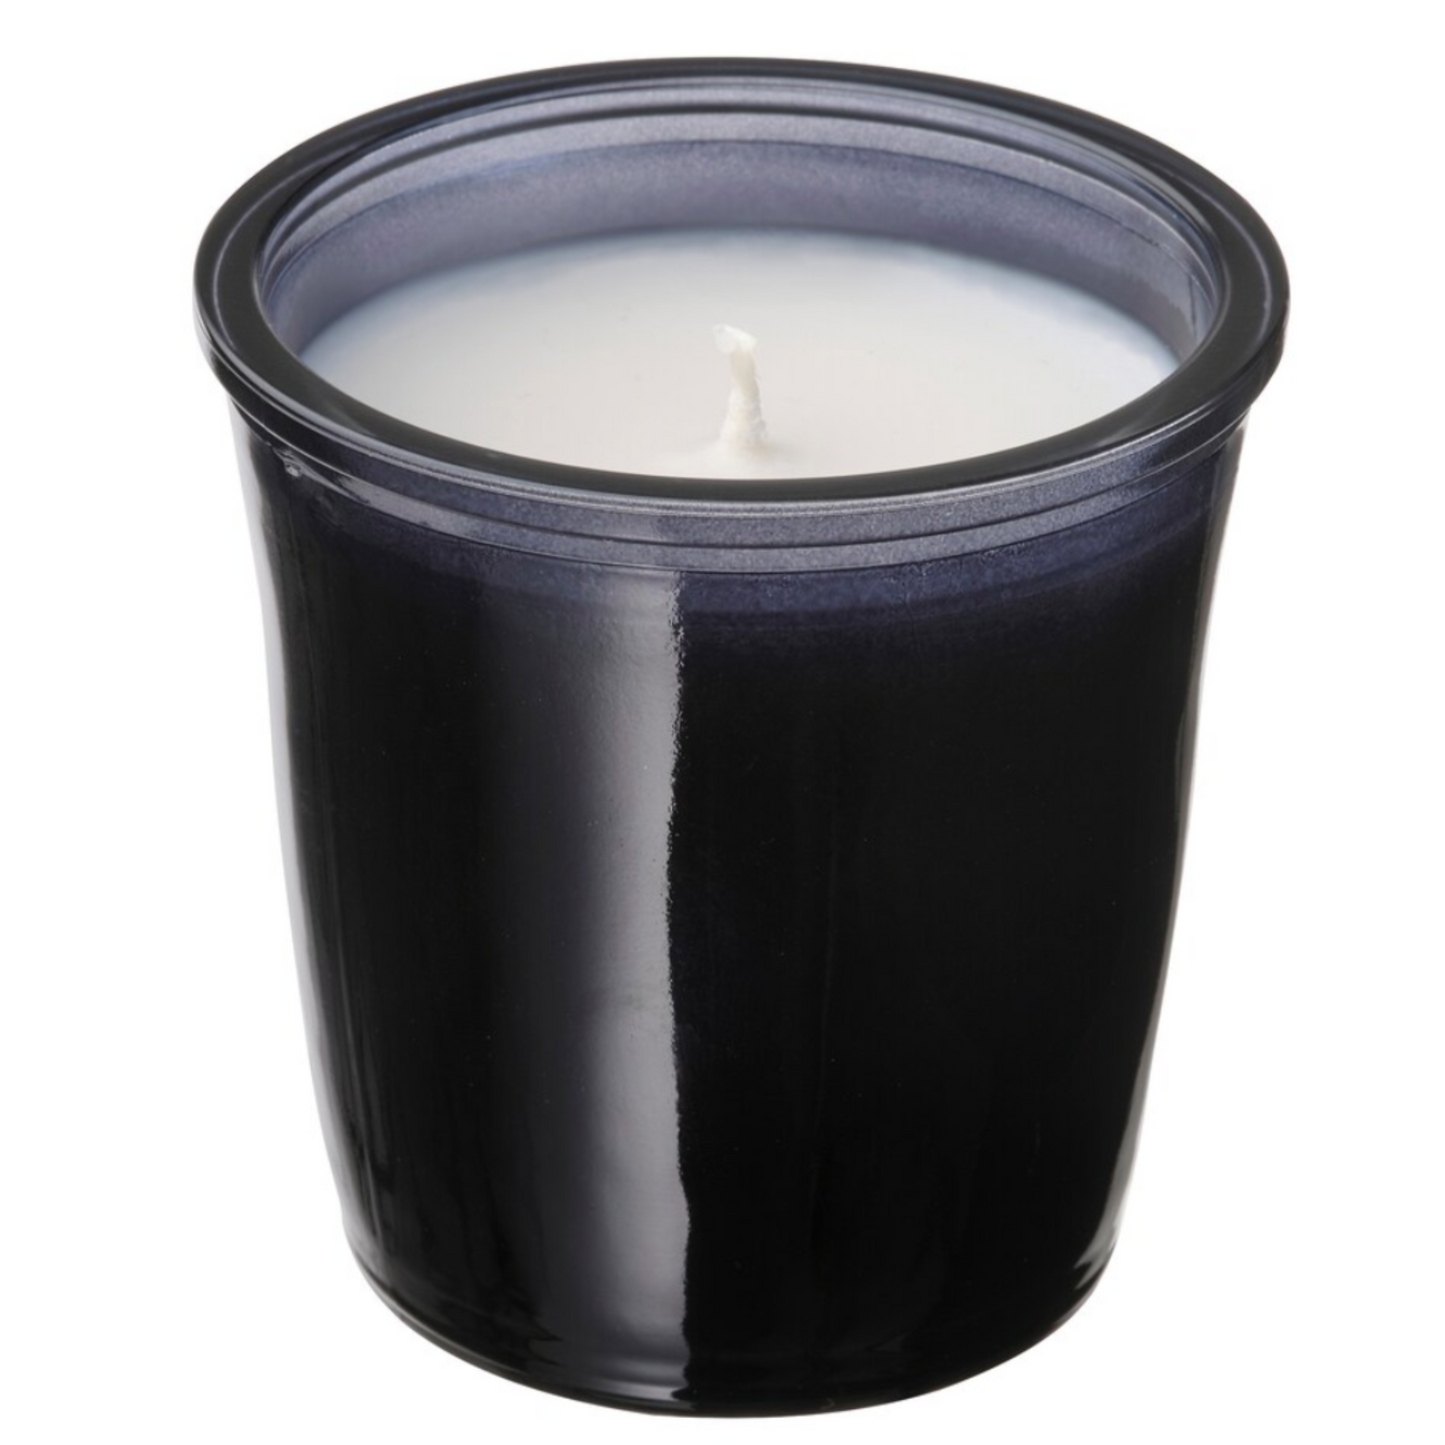 Ikea Lovtrad Candle in a Glass, Black Rose, 20h (8300933447967)